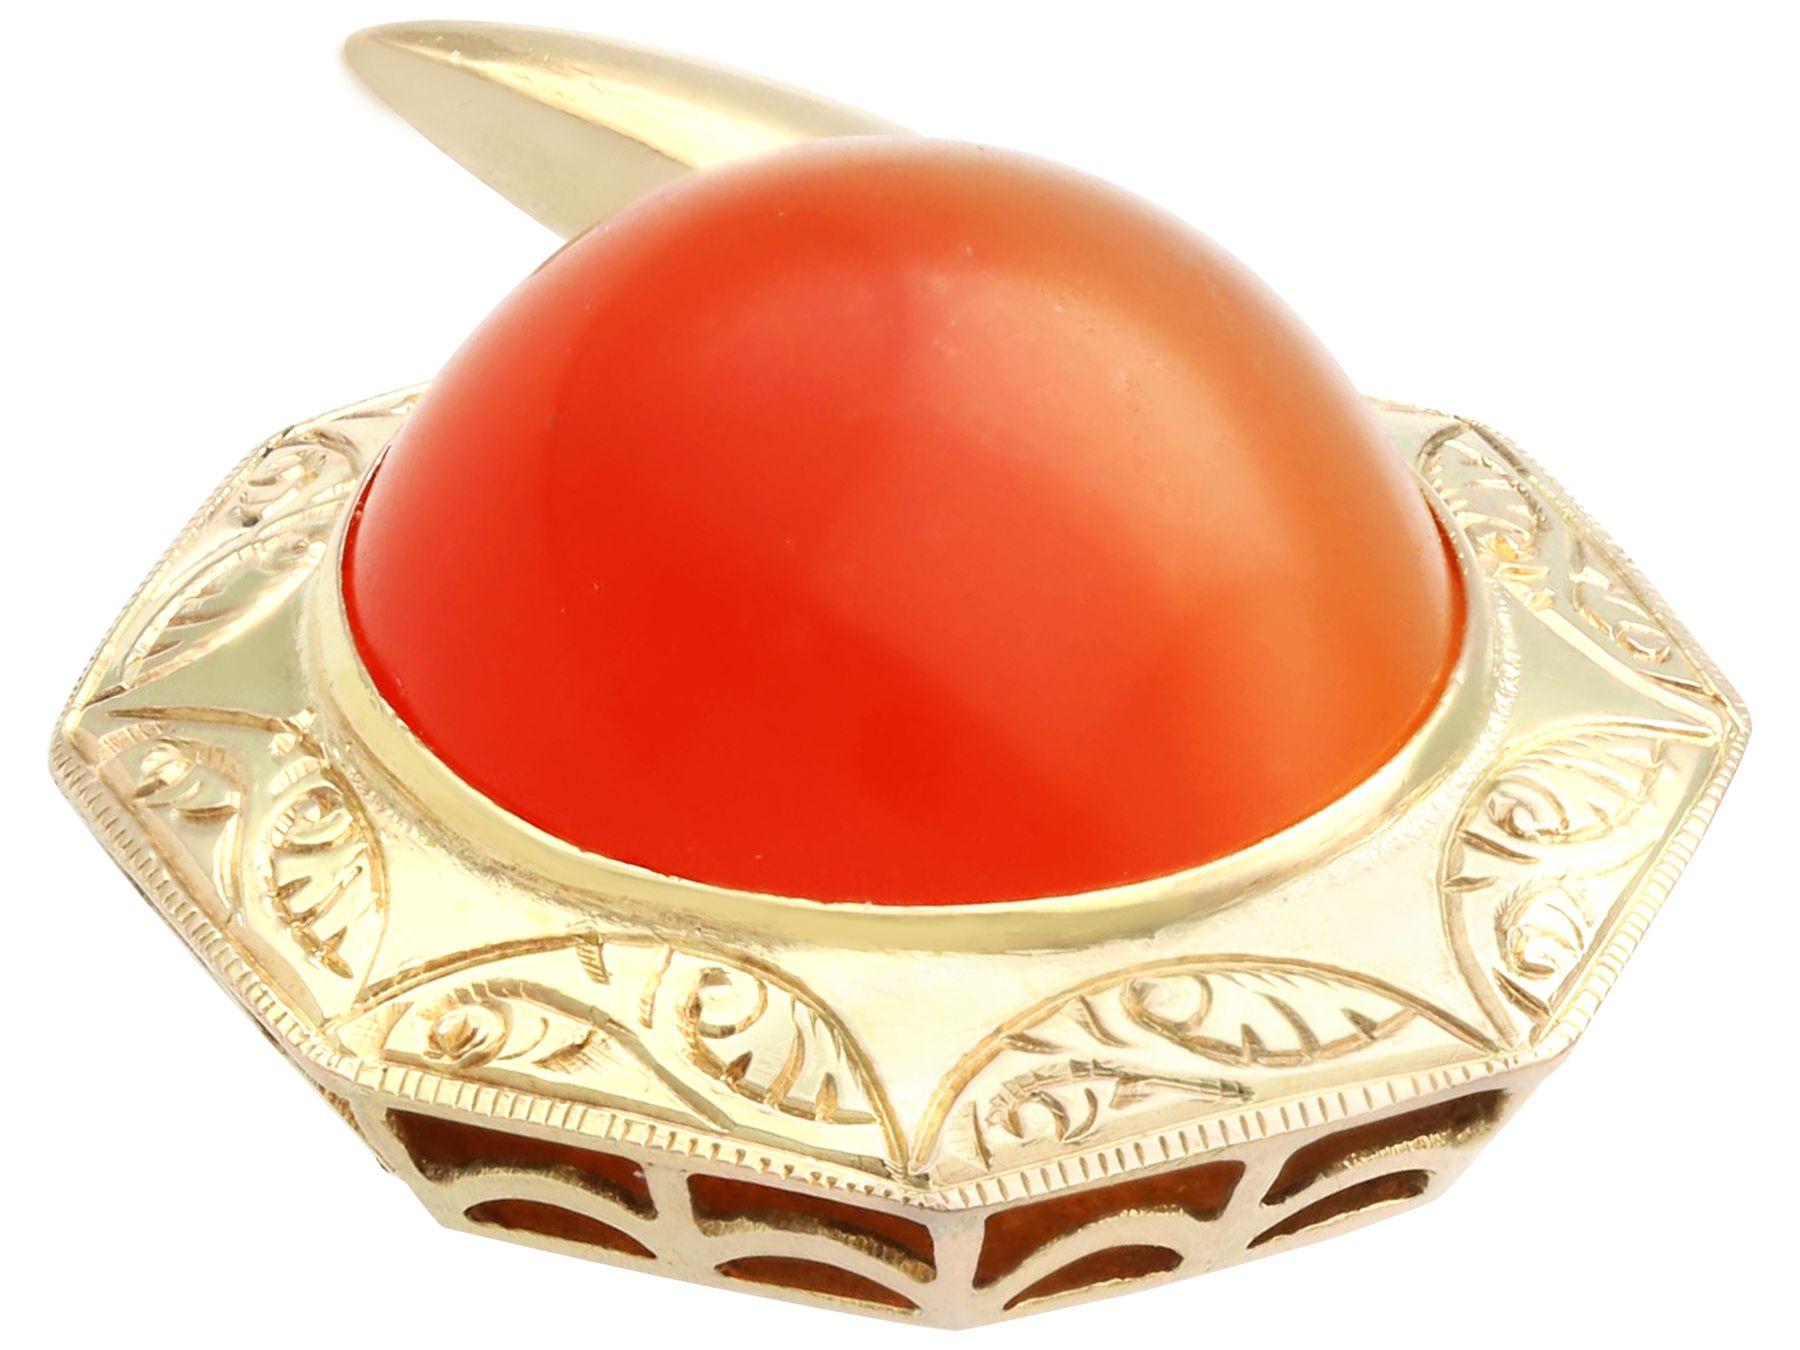 Cabochon Antique 9.78 Carat Carnelian and Yellow Gold Cufflinks, Circa 1890 For Sale